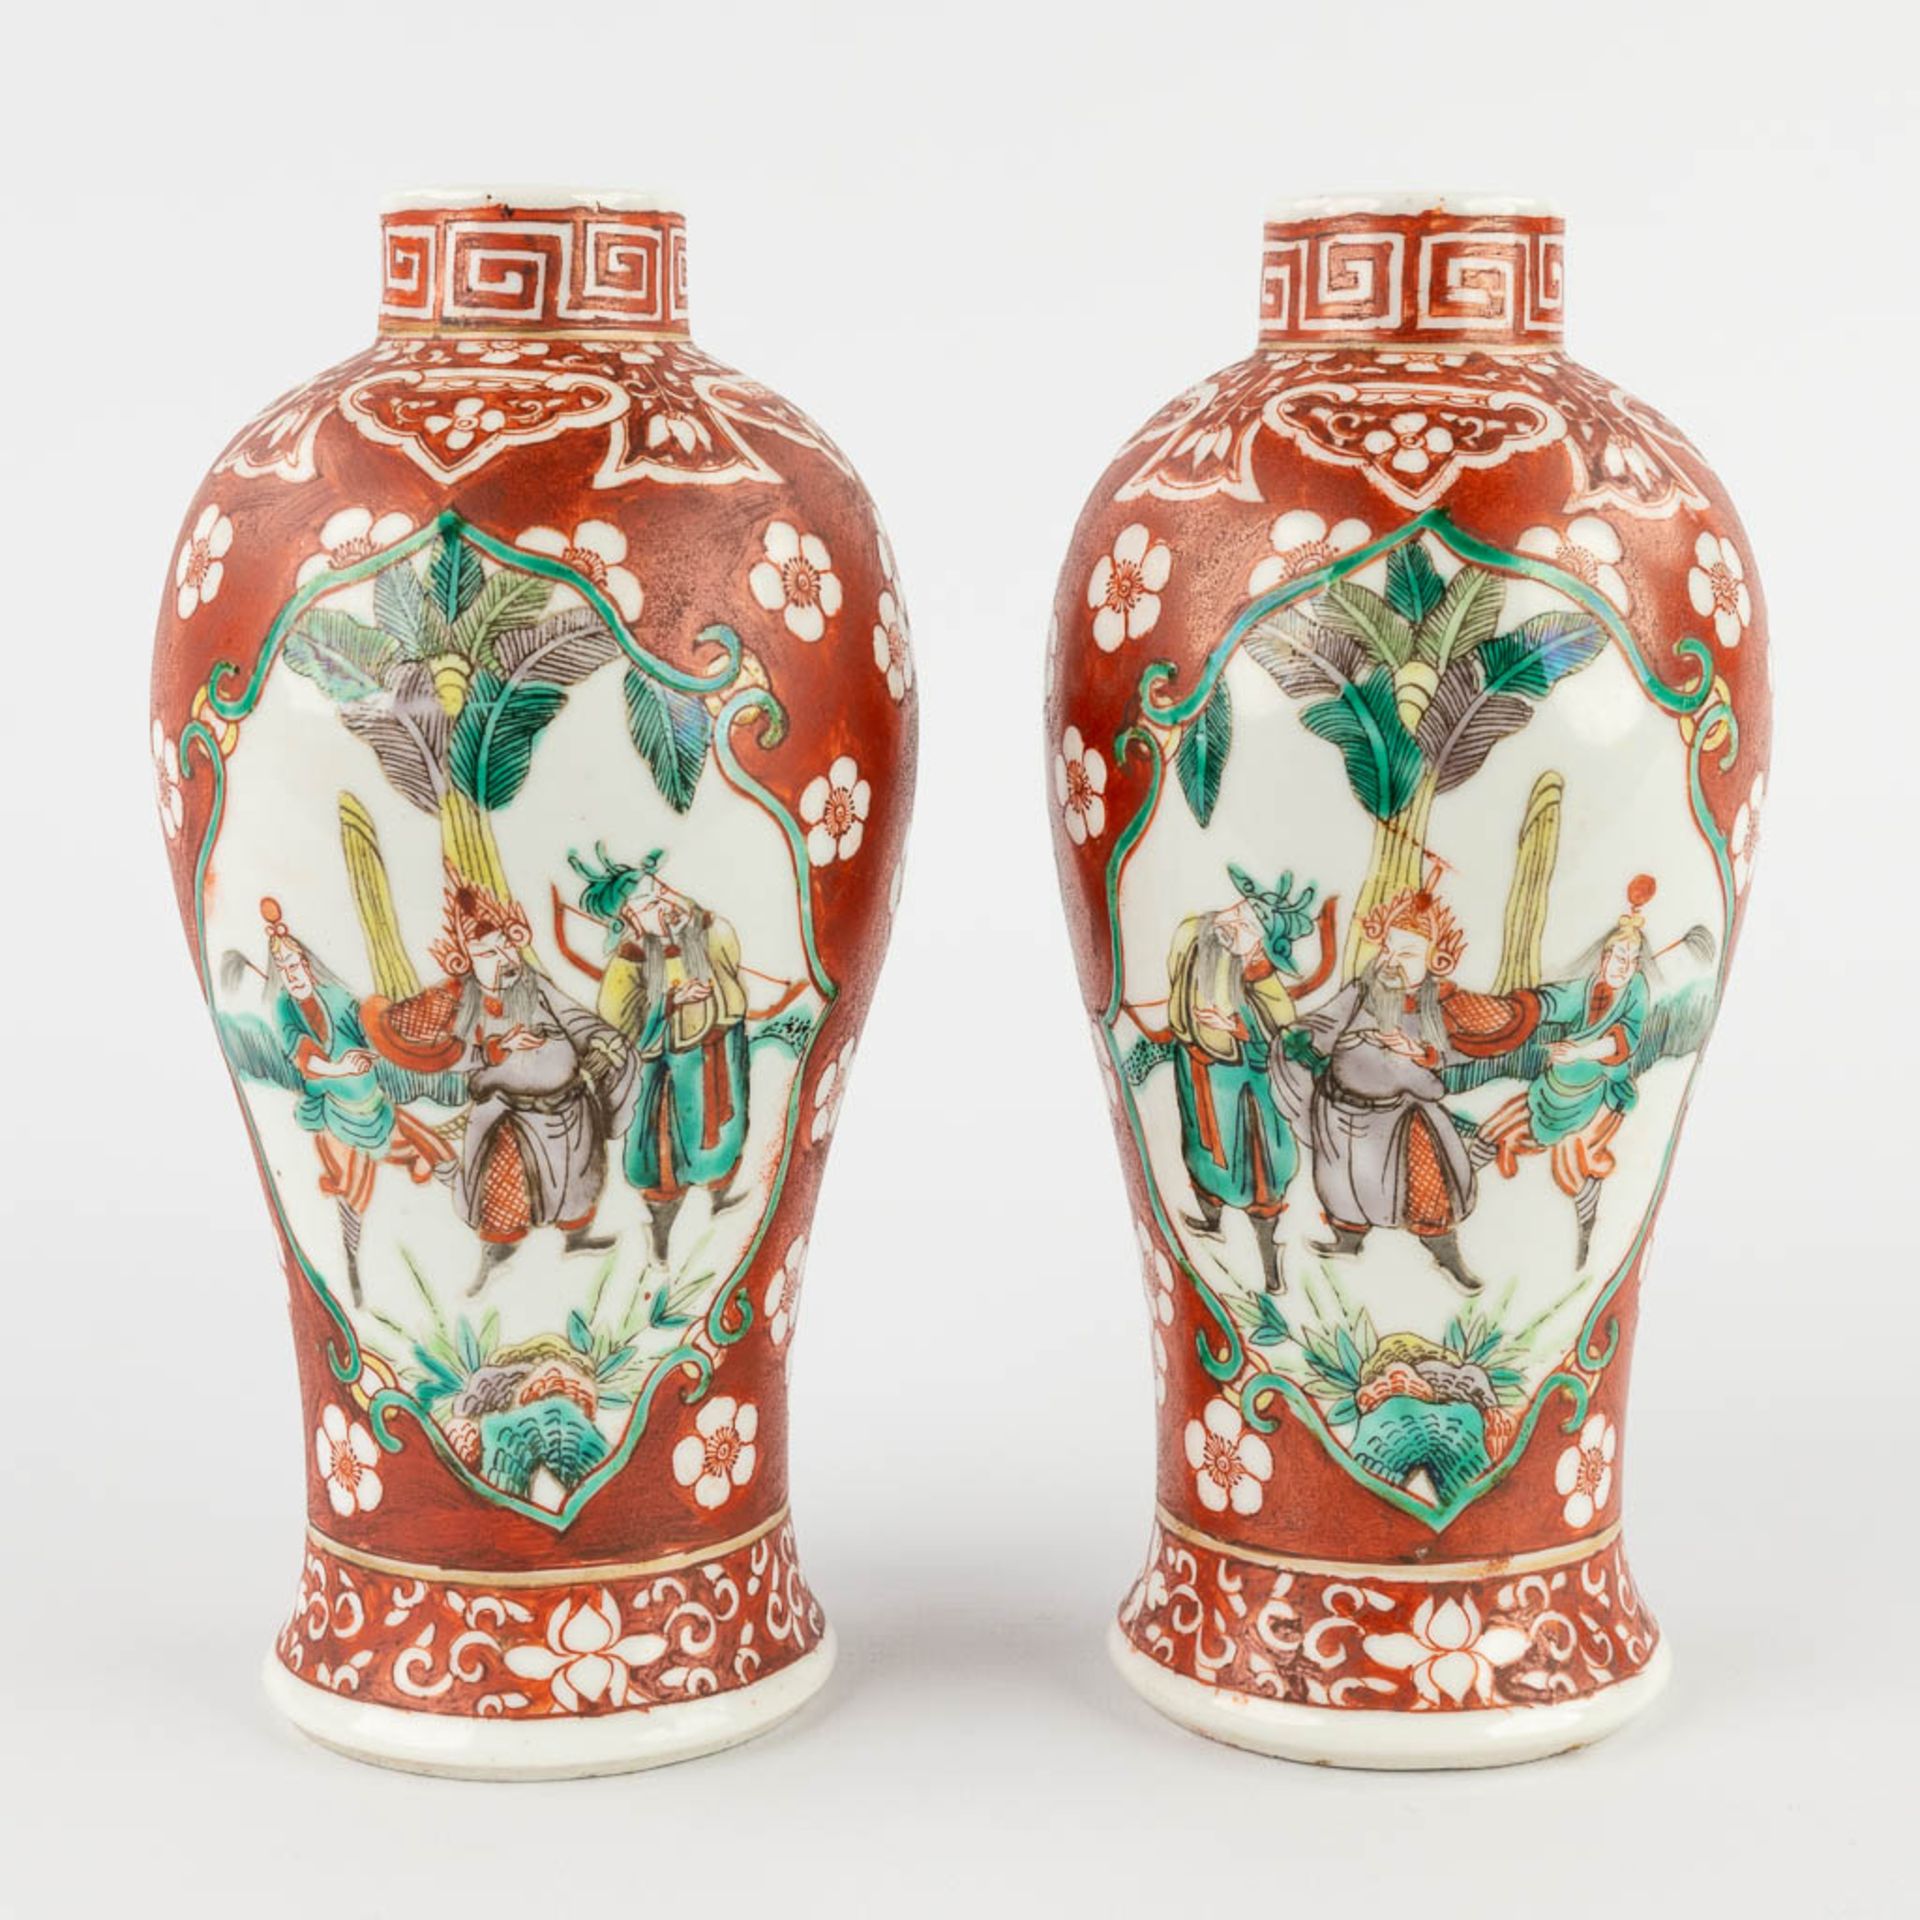 Five pieces of Chinese porcelain, decorated with hand-painted images. 19th/20th C. (H:19 x D:9 cm) - Bild 3 aus 20